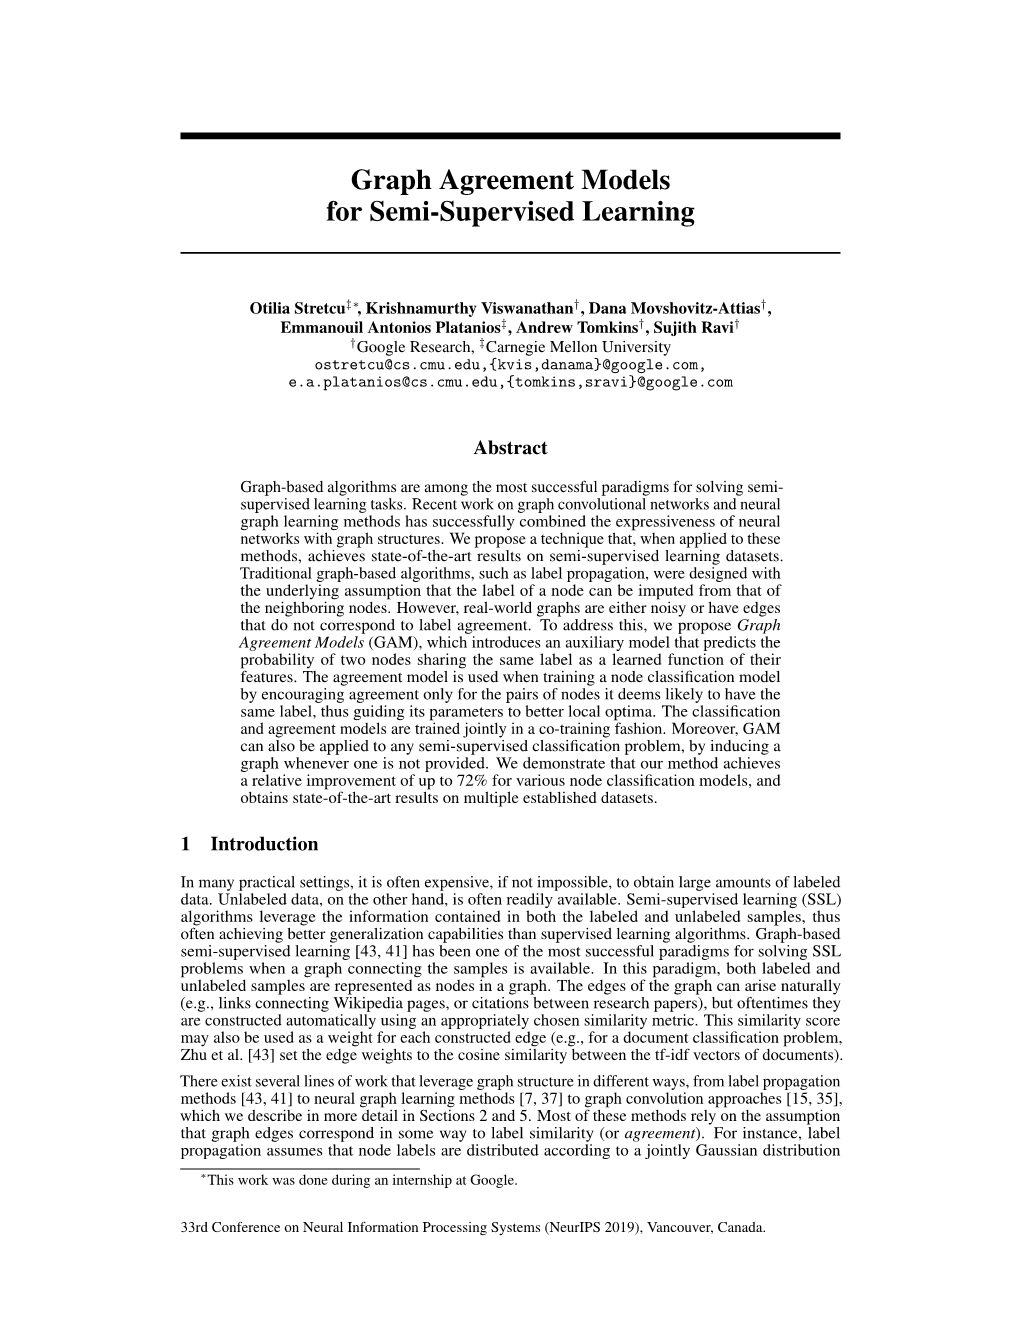 Graph Agreement Models for Semi-Supervised Learning